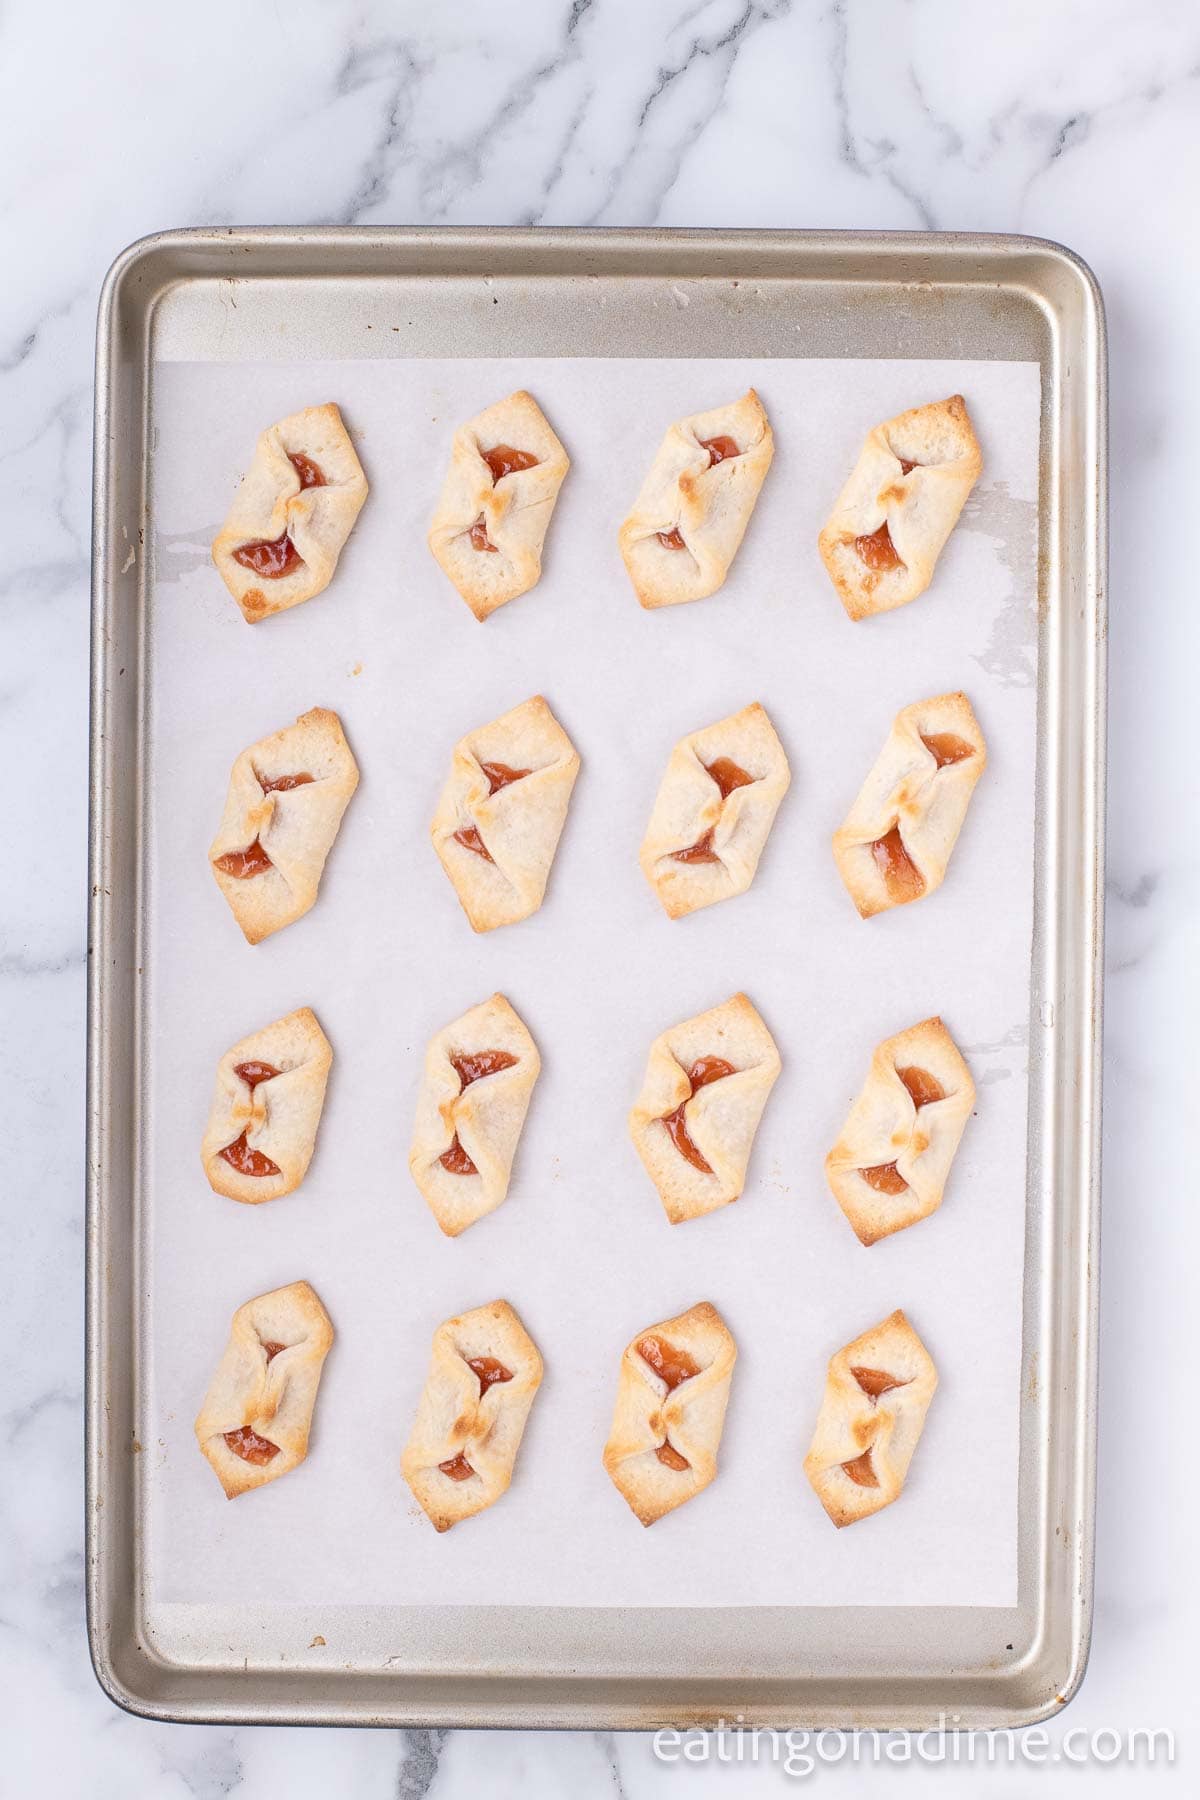 Baked Strawberry Pinch Cookies on a baking sheet